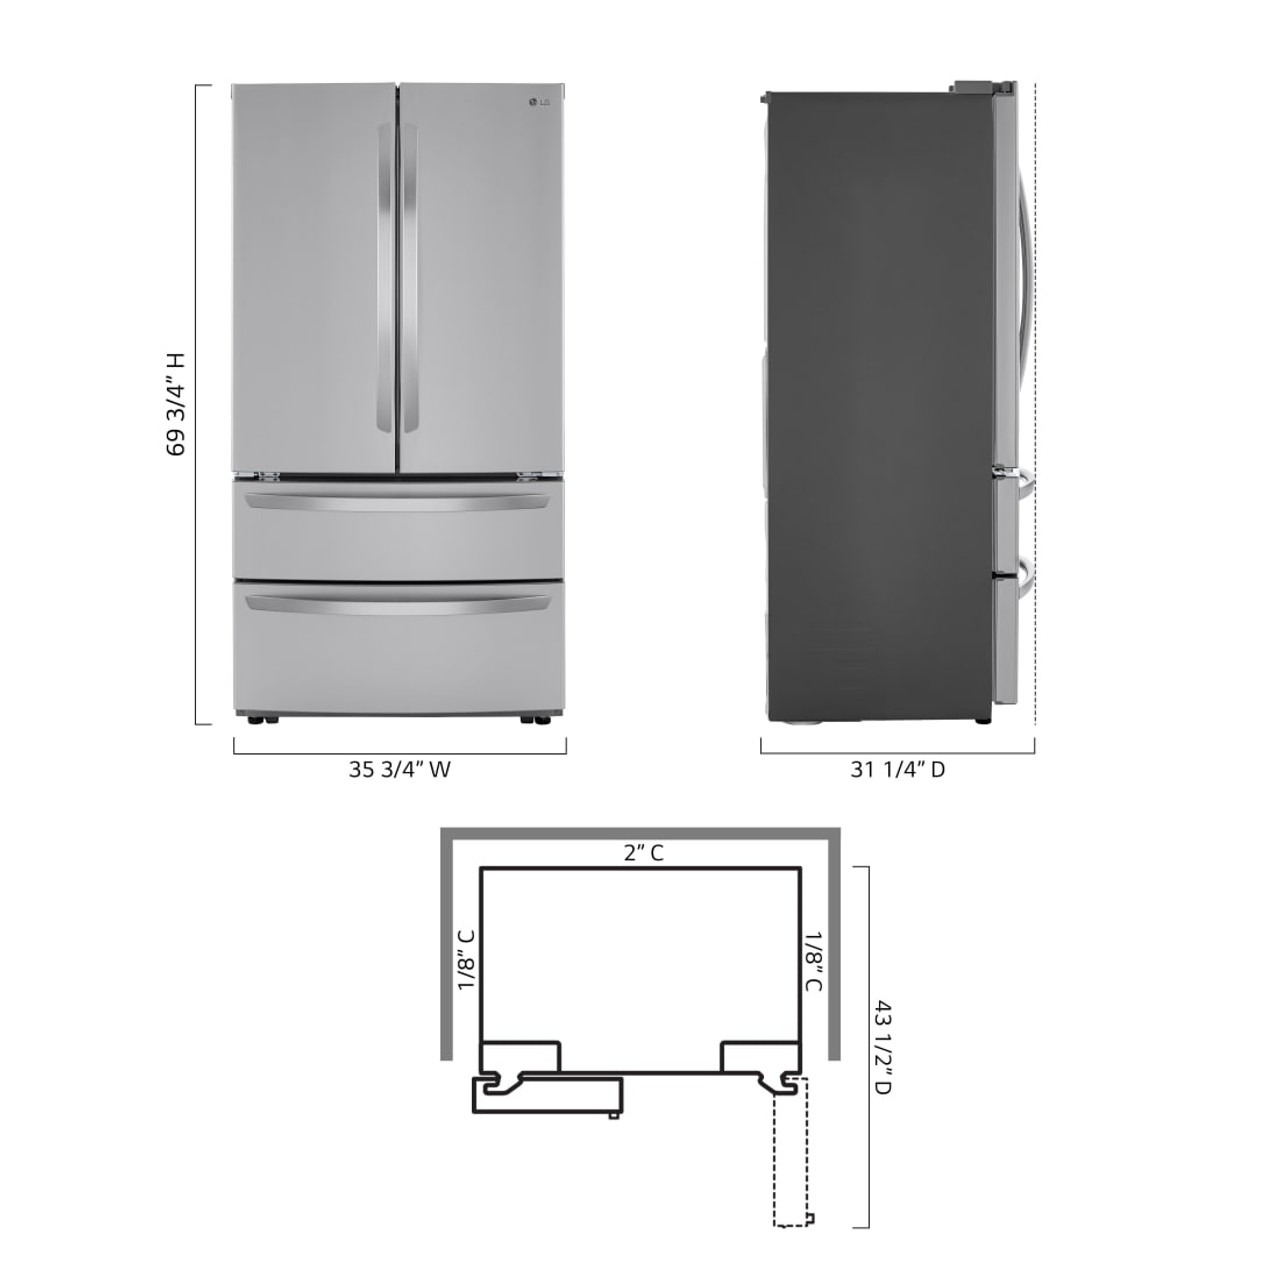 LG 23 cu. ft. French Door Counter-Depth Refrigerator - LMWC23626S